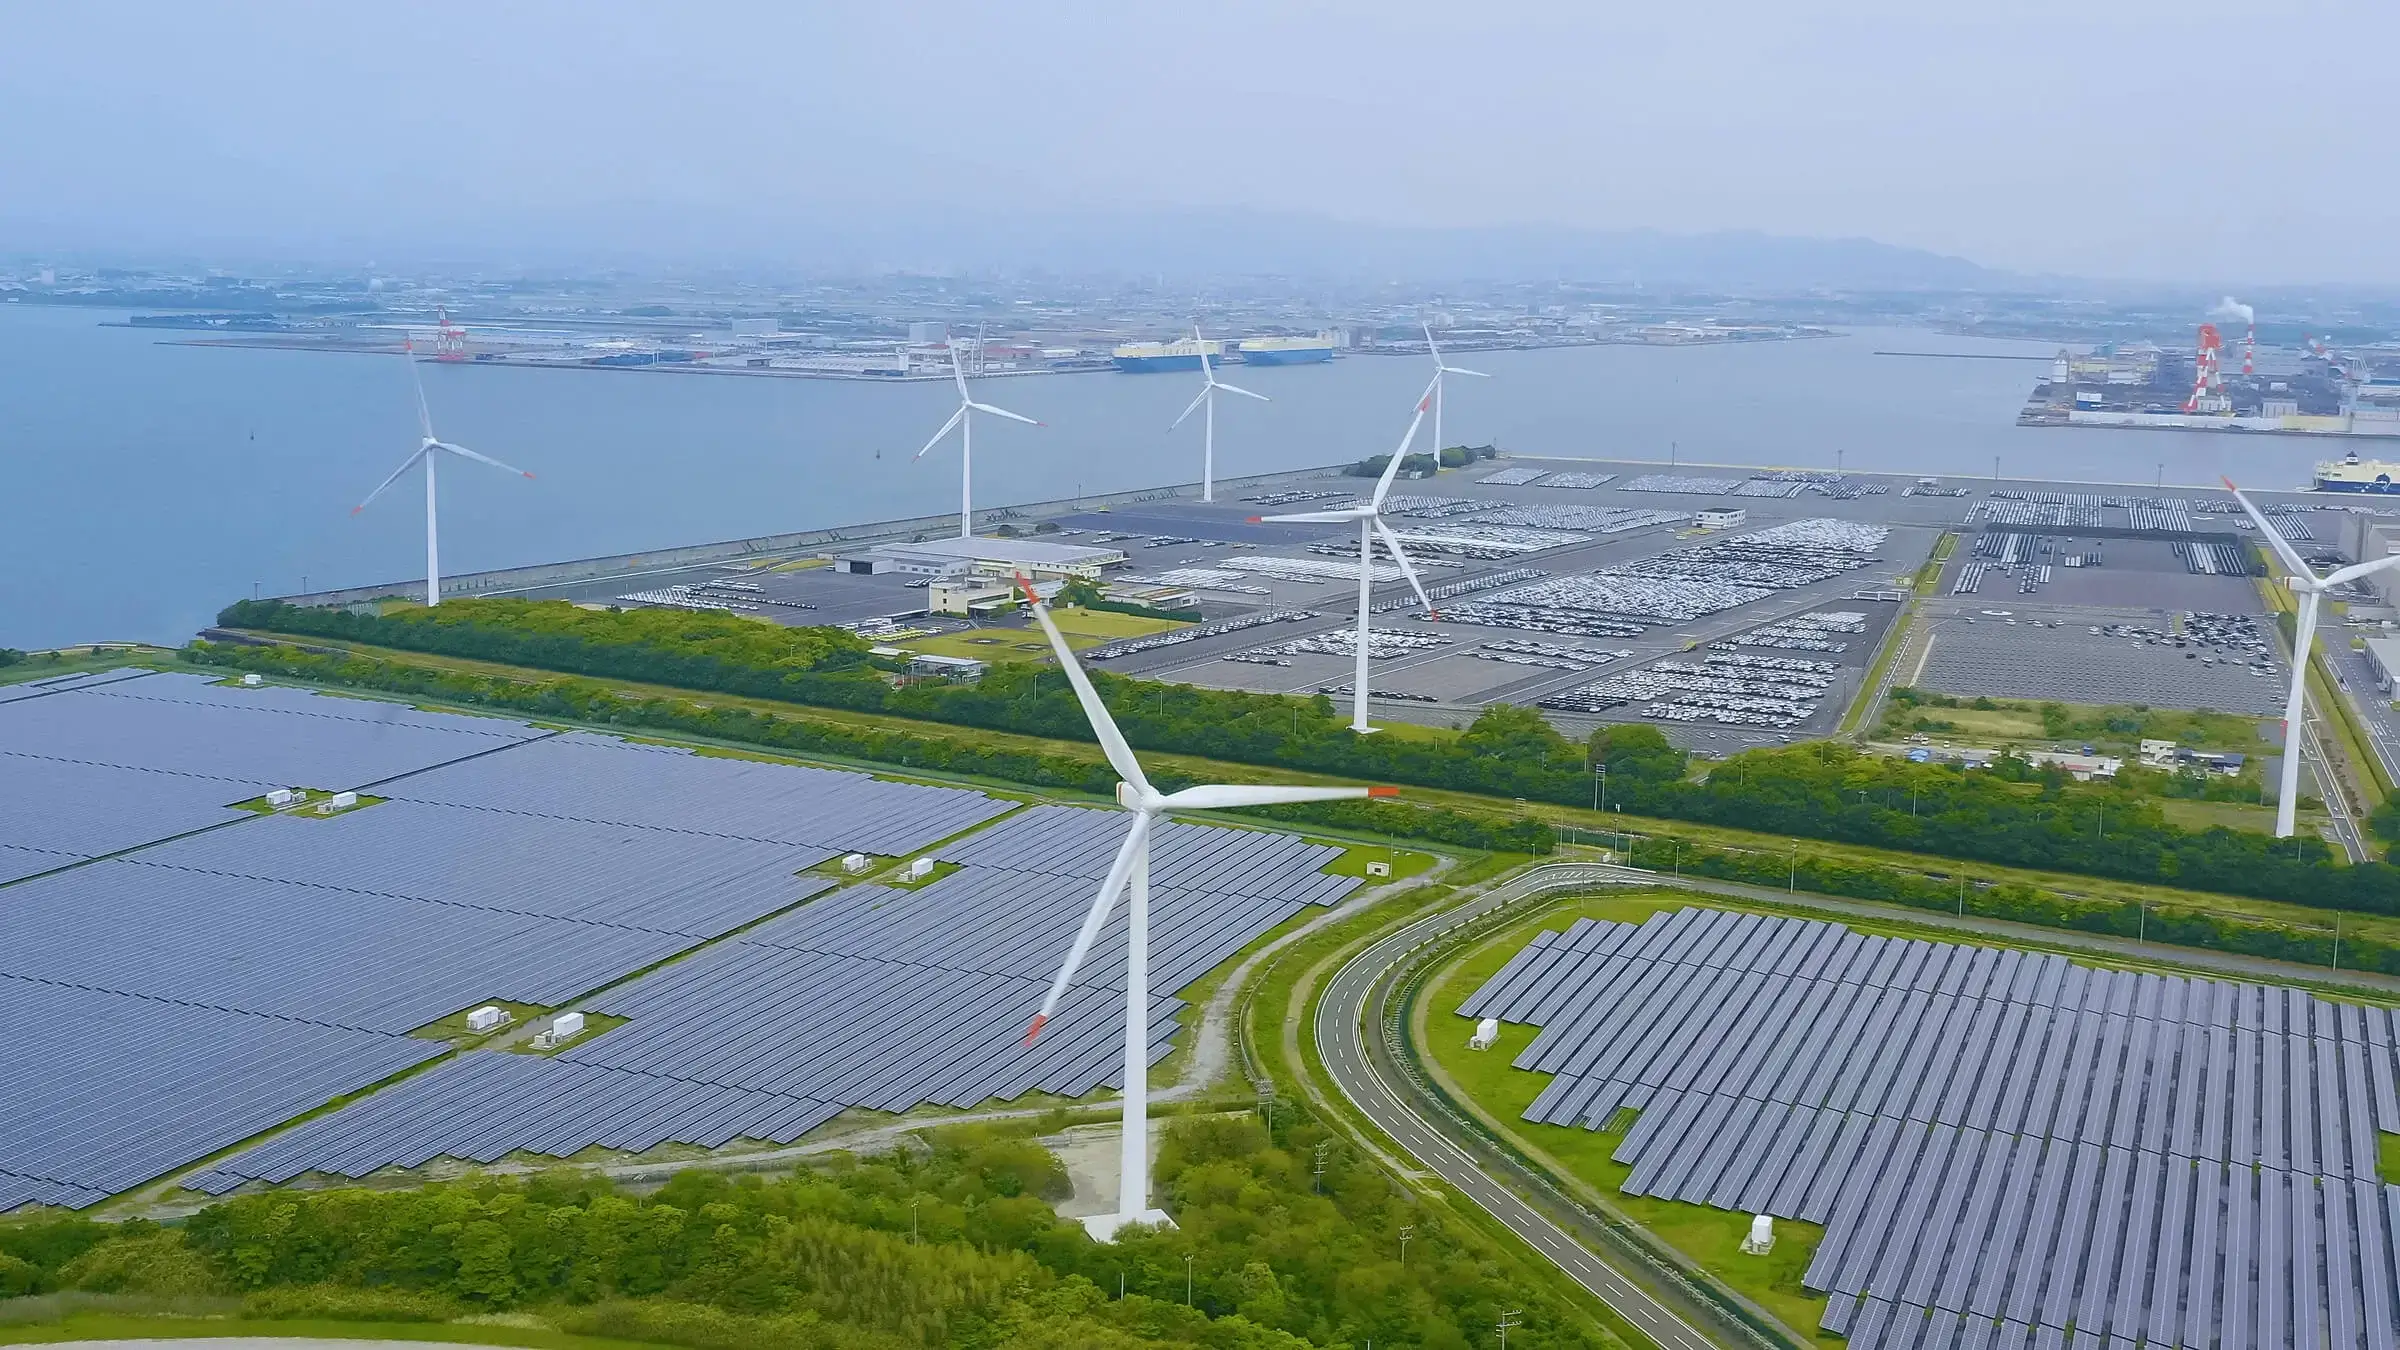 A large scale solar and wind farm near a large port.